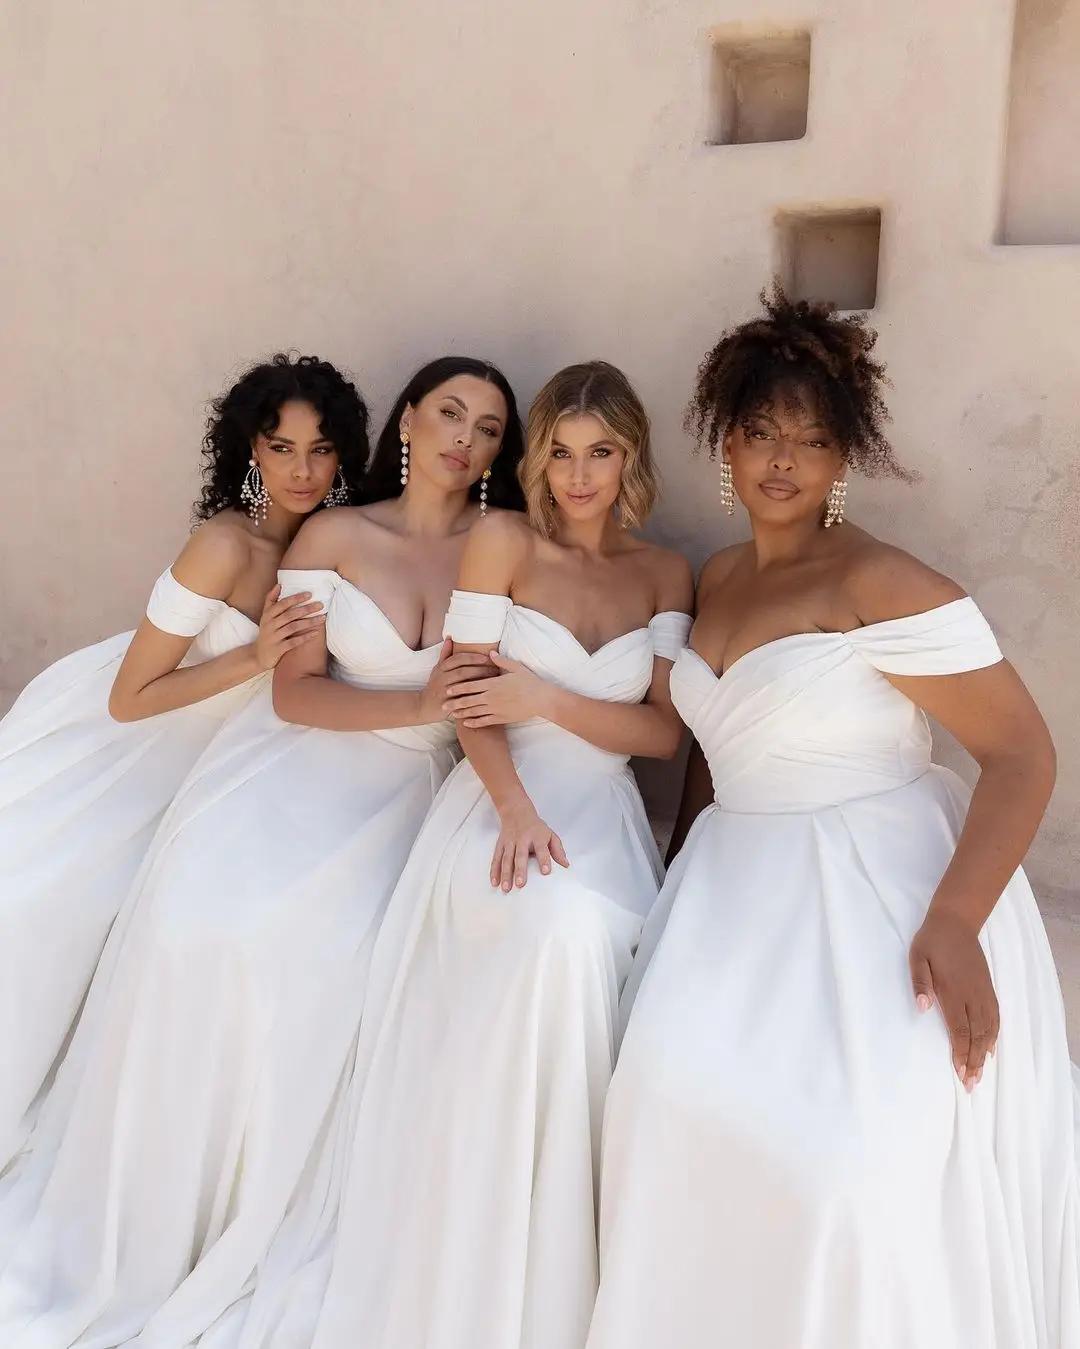 Models wearing different sizes of the same wedding dress